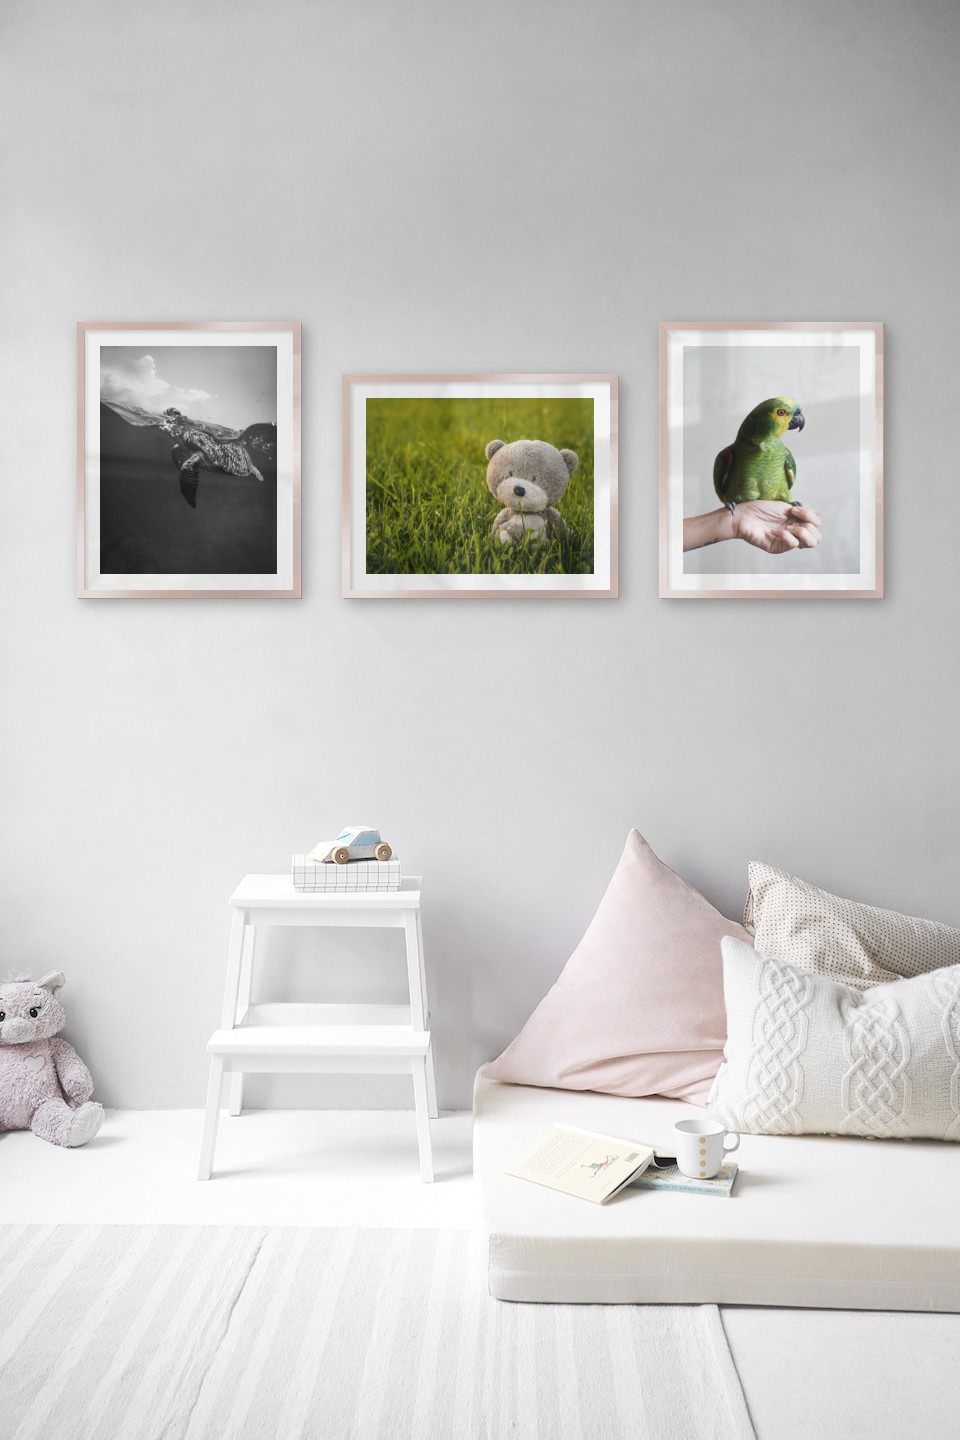 Gallery wall with picture frames in copper in sizes 40x50 with prints "Turtle", "Teddy bear in a field" and "Green parrot"